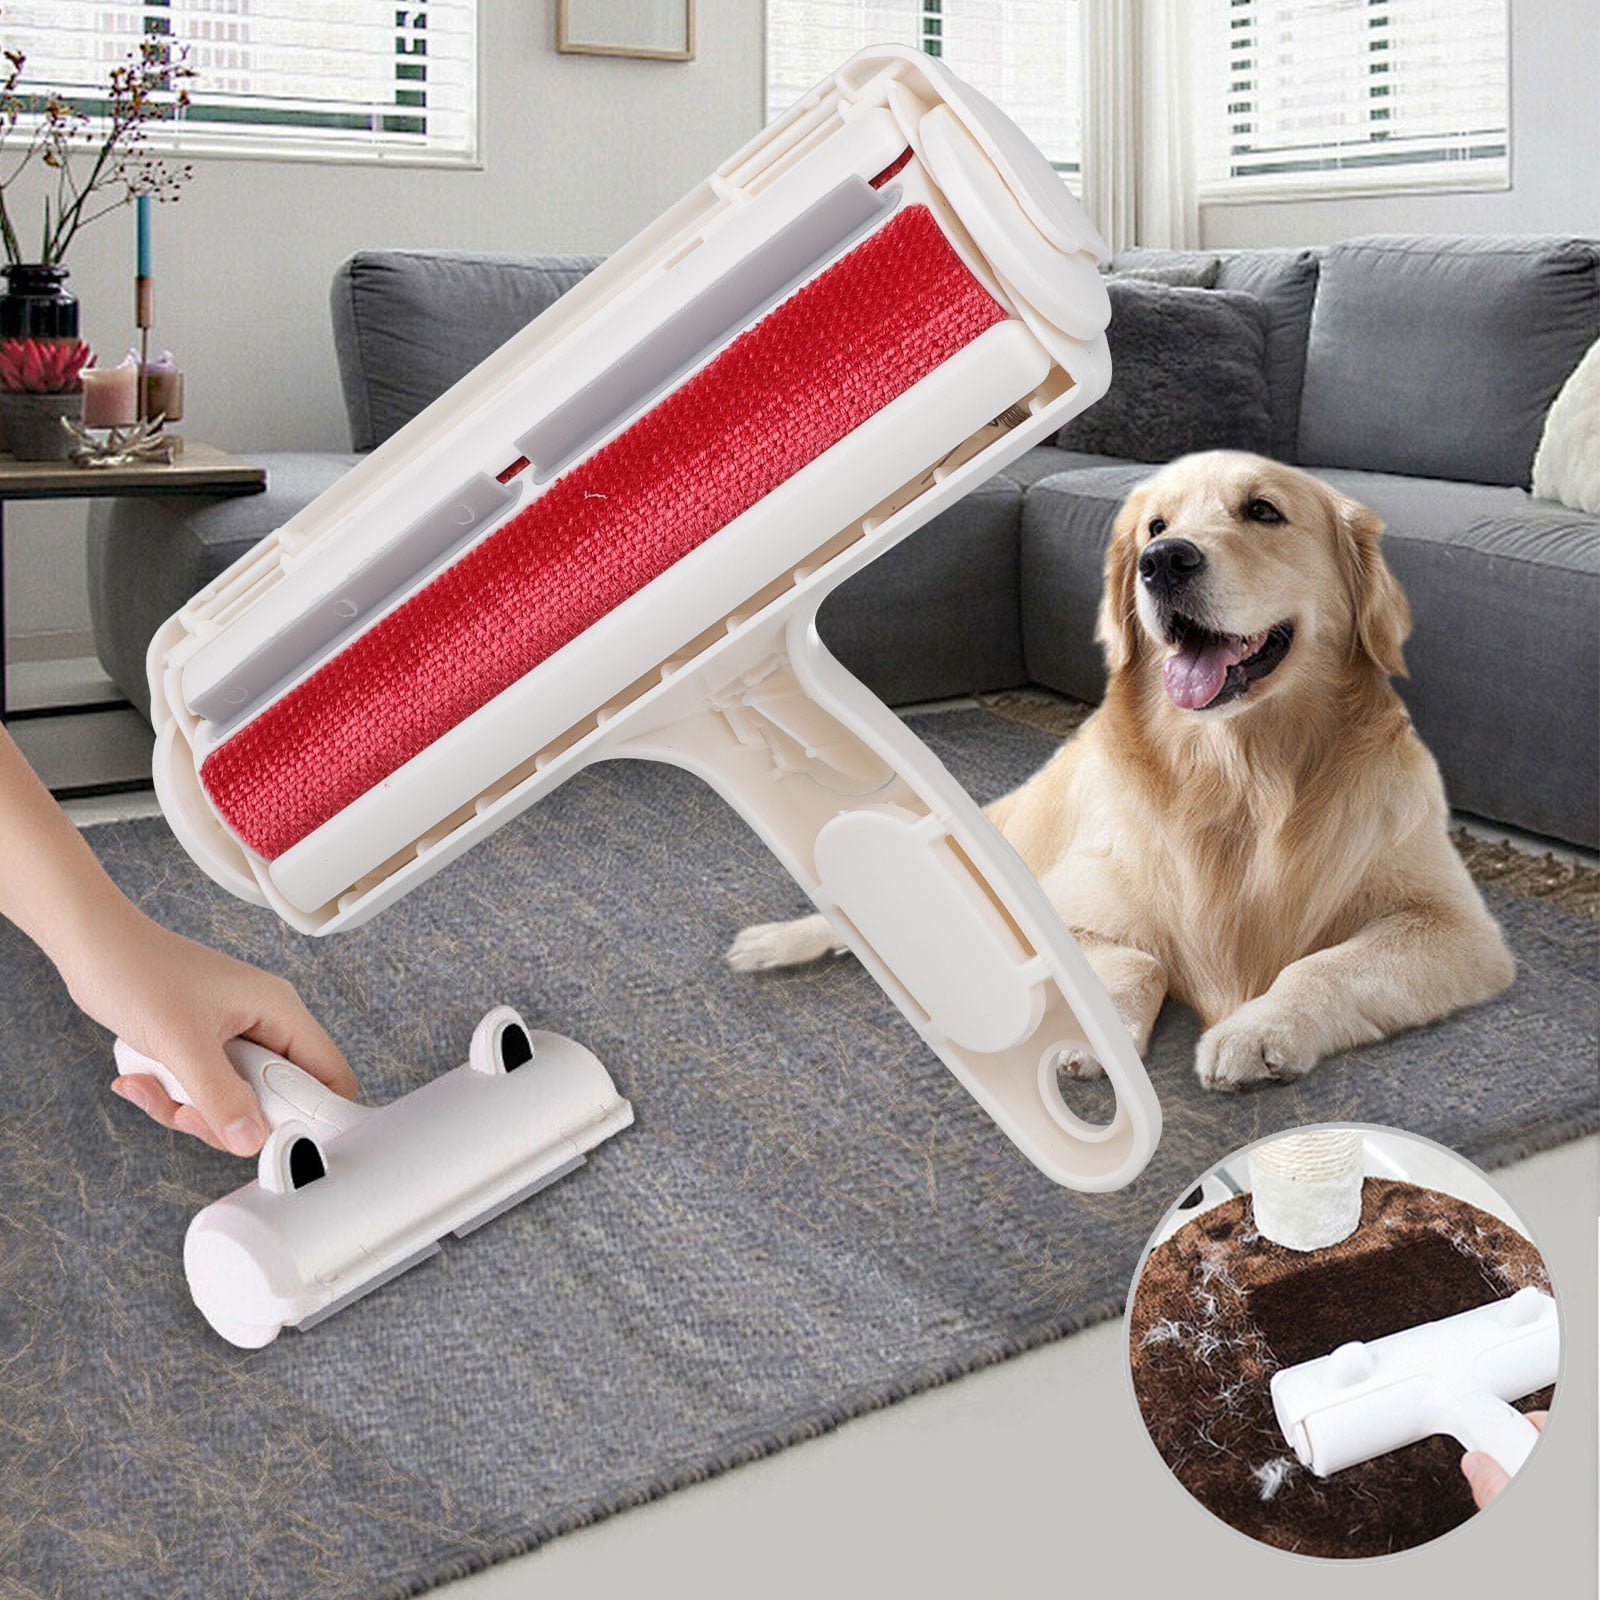 Yous Auto Pet Hair Remover Roller for Furniture Reusable Dog & Cat Hair Remover Lint Roller Perfect for Car Clothing Furniture Couch Sofa Carpets with Cute Cat Ear